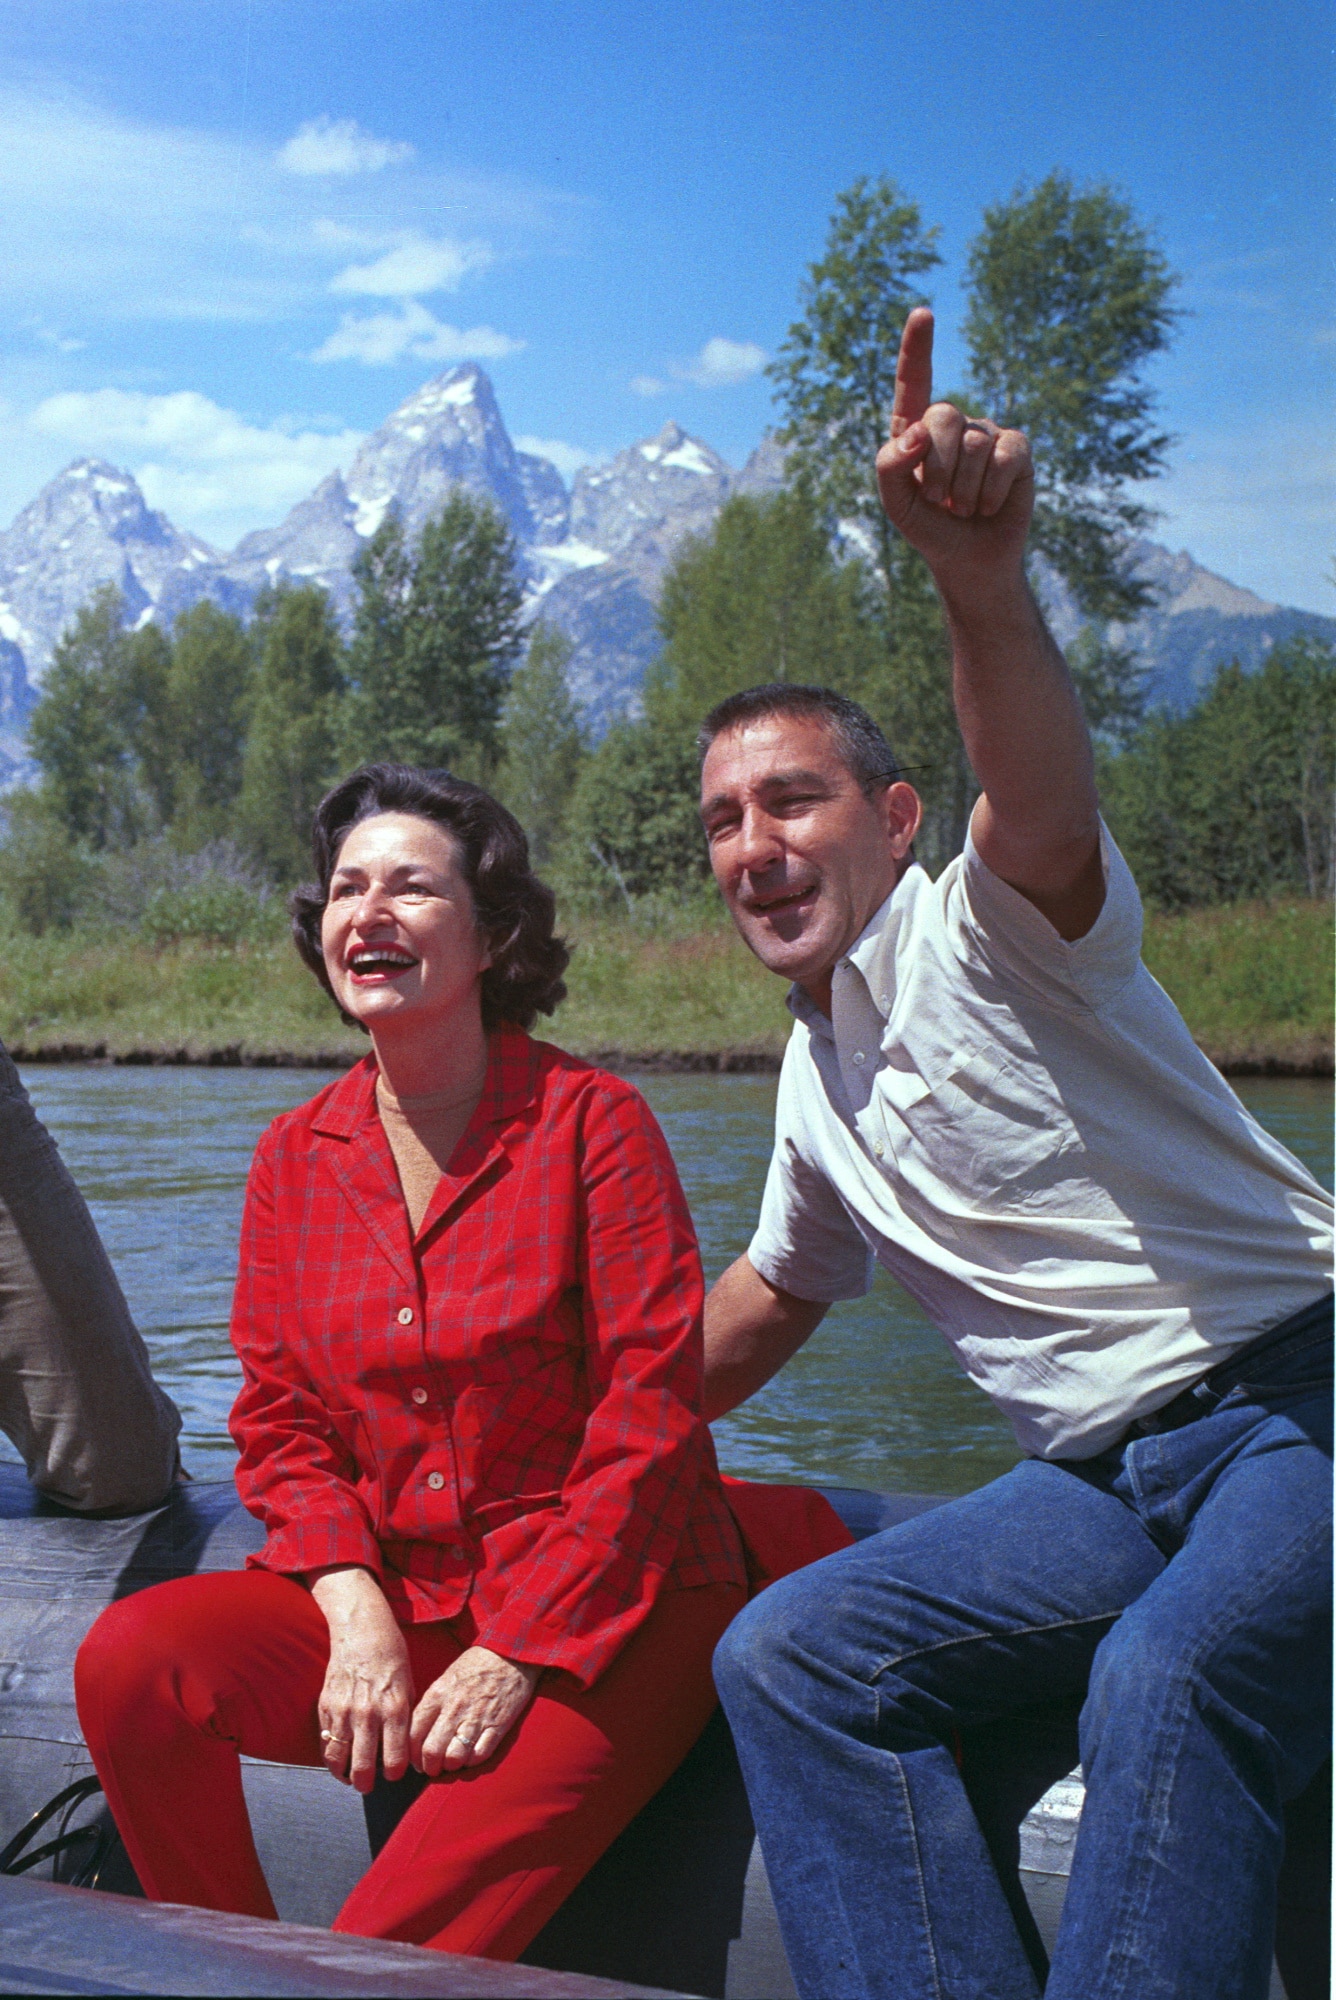 Lady Bird Johnson would prove to be the most progressive first lady in American history when it came to conservation and the environment | Bipartisan Environmental Activism